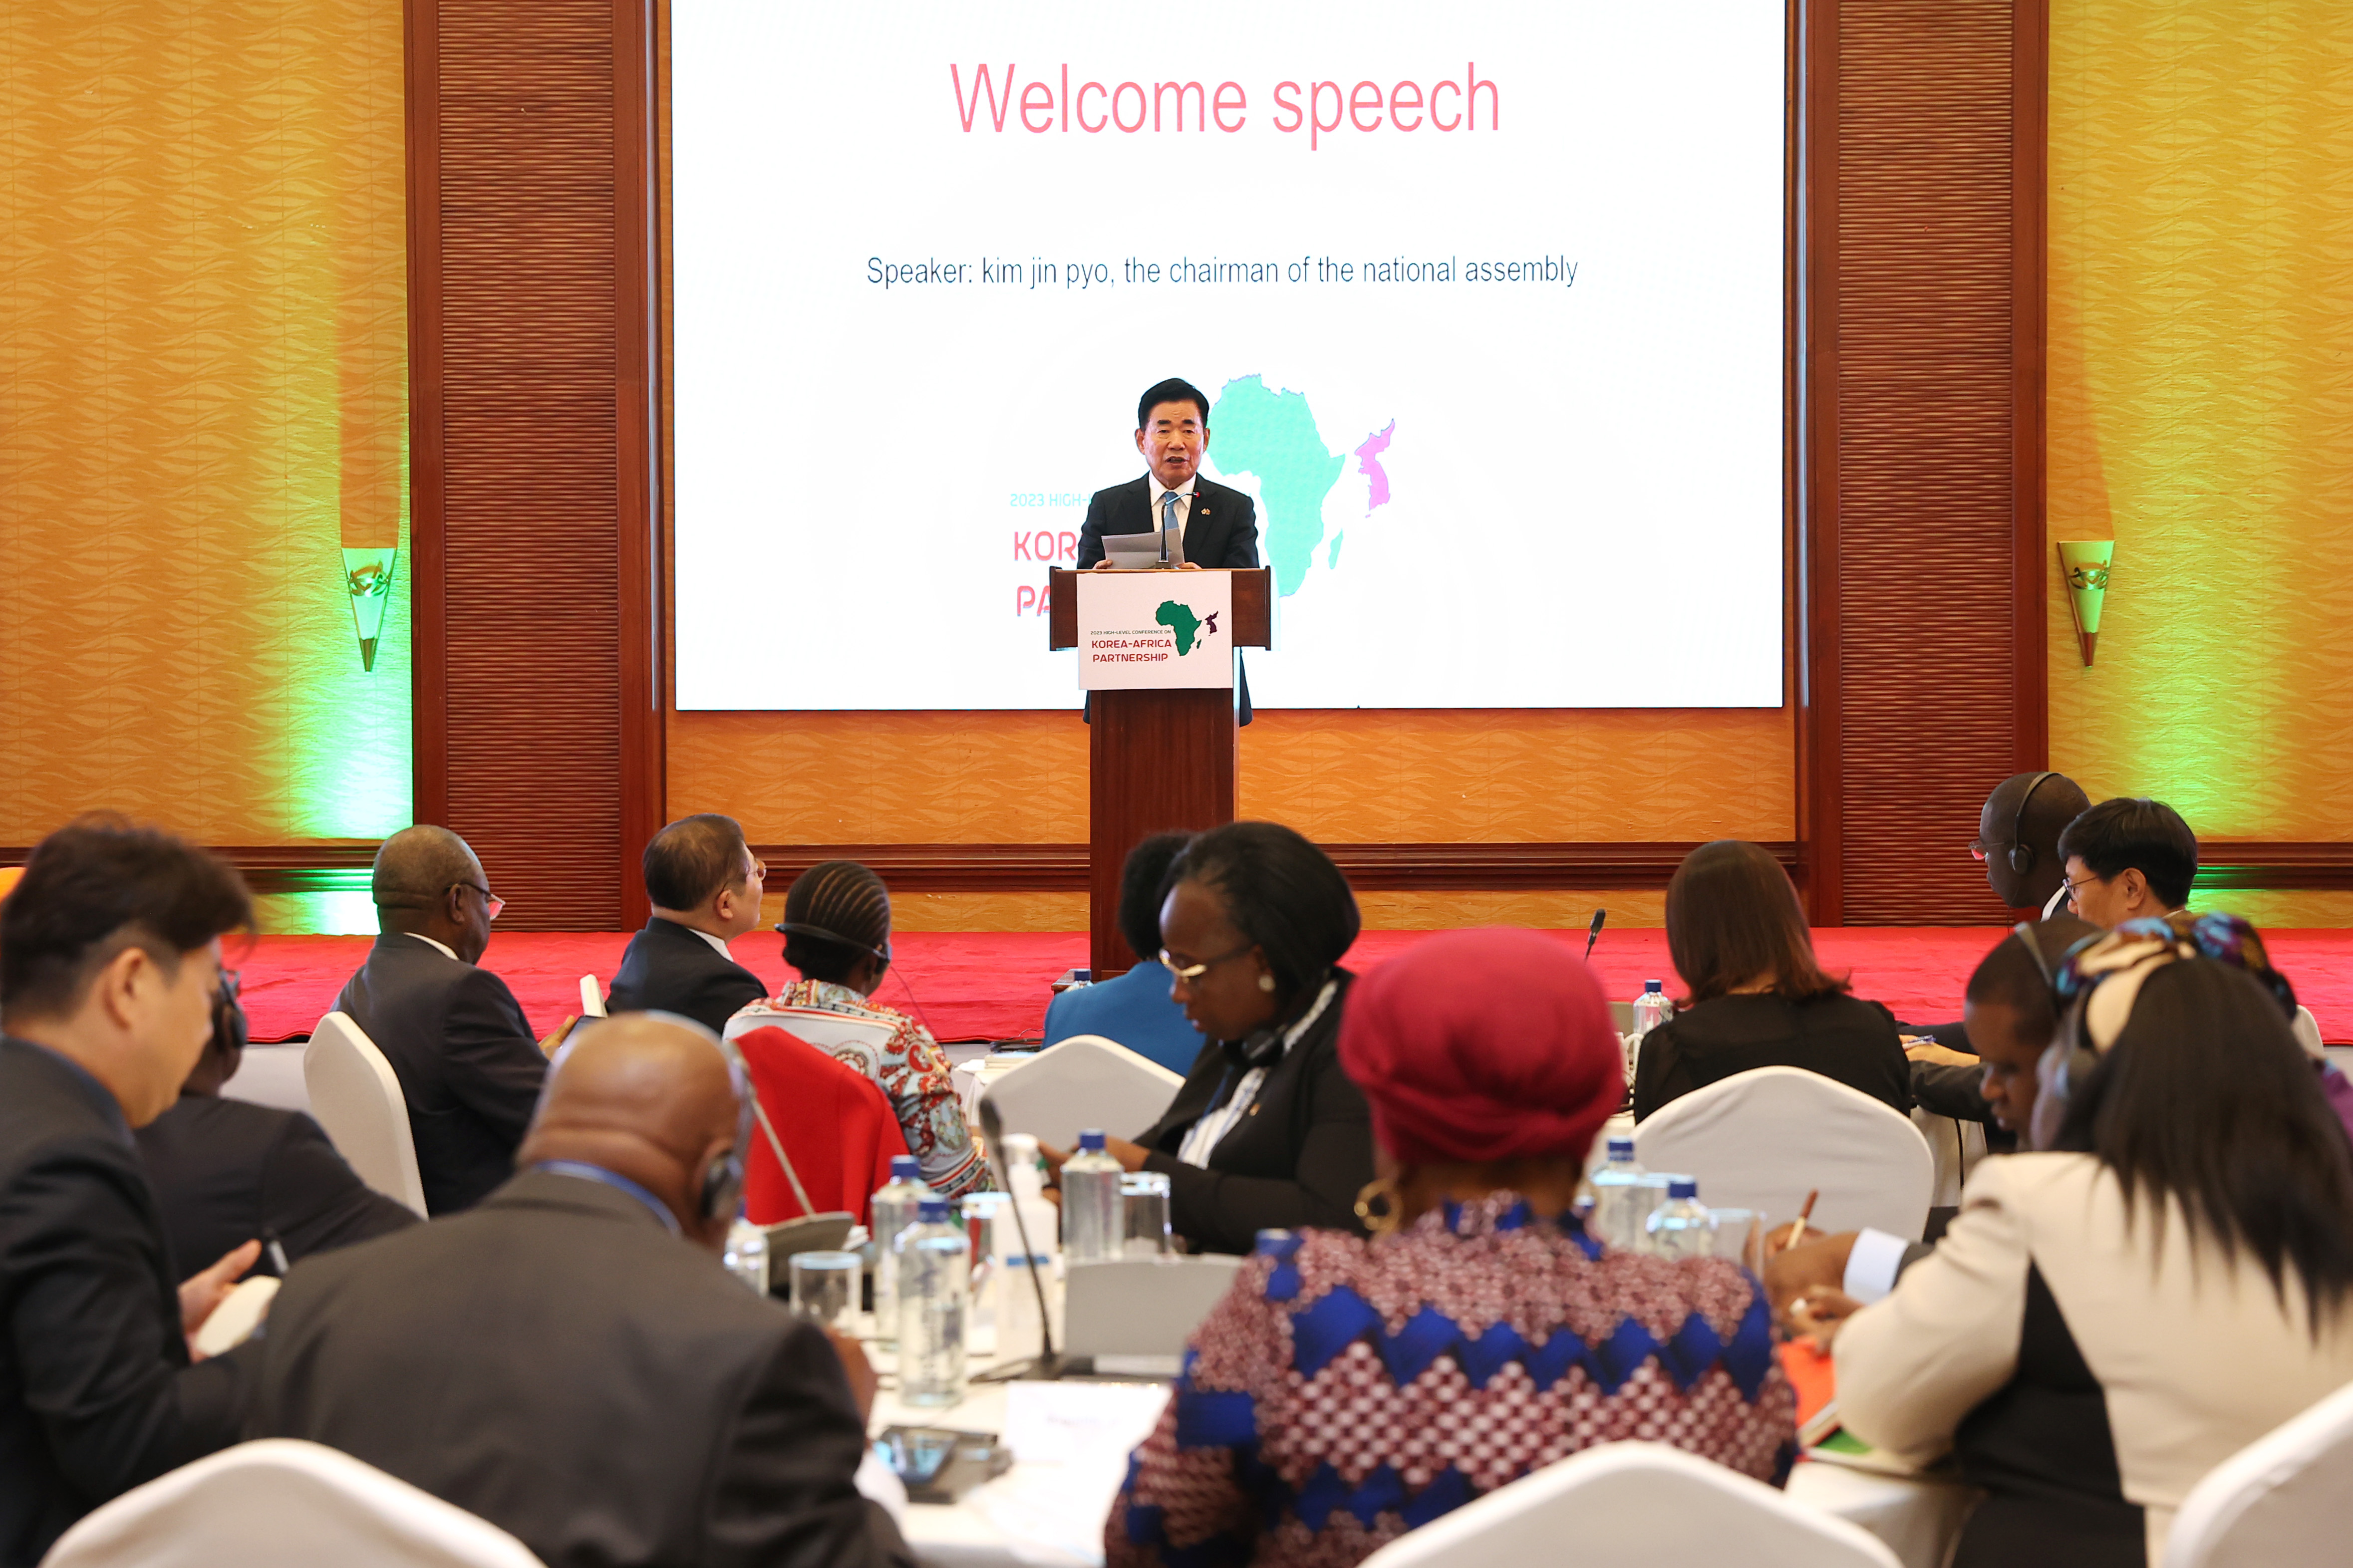 Speaker Kim Jin-pyo meets Kenyan President and Senate Speaker and attends the opening ceremony of 2030 High Level Conference on Korea-Africa Partnership (KOAFP)